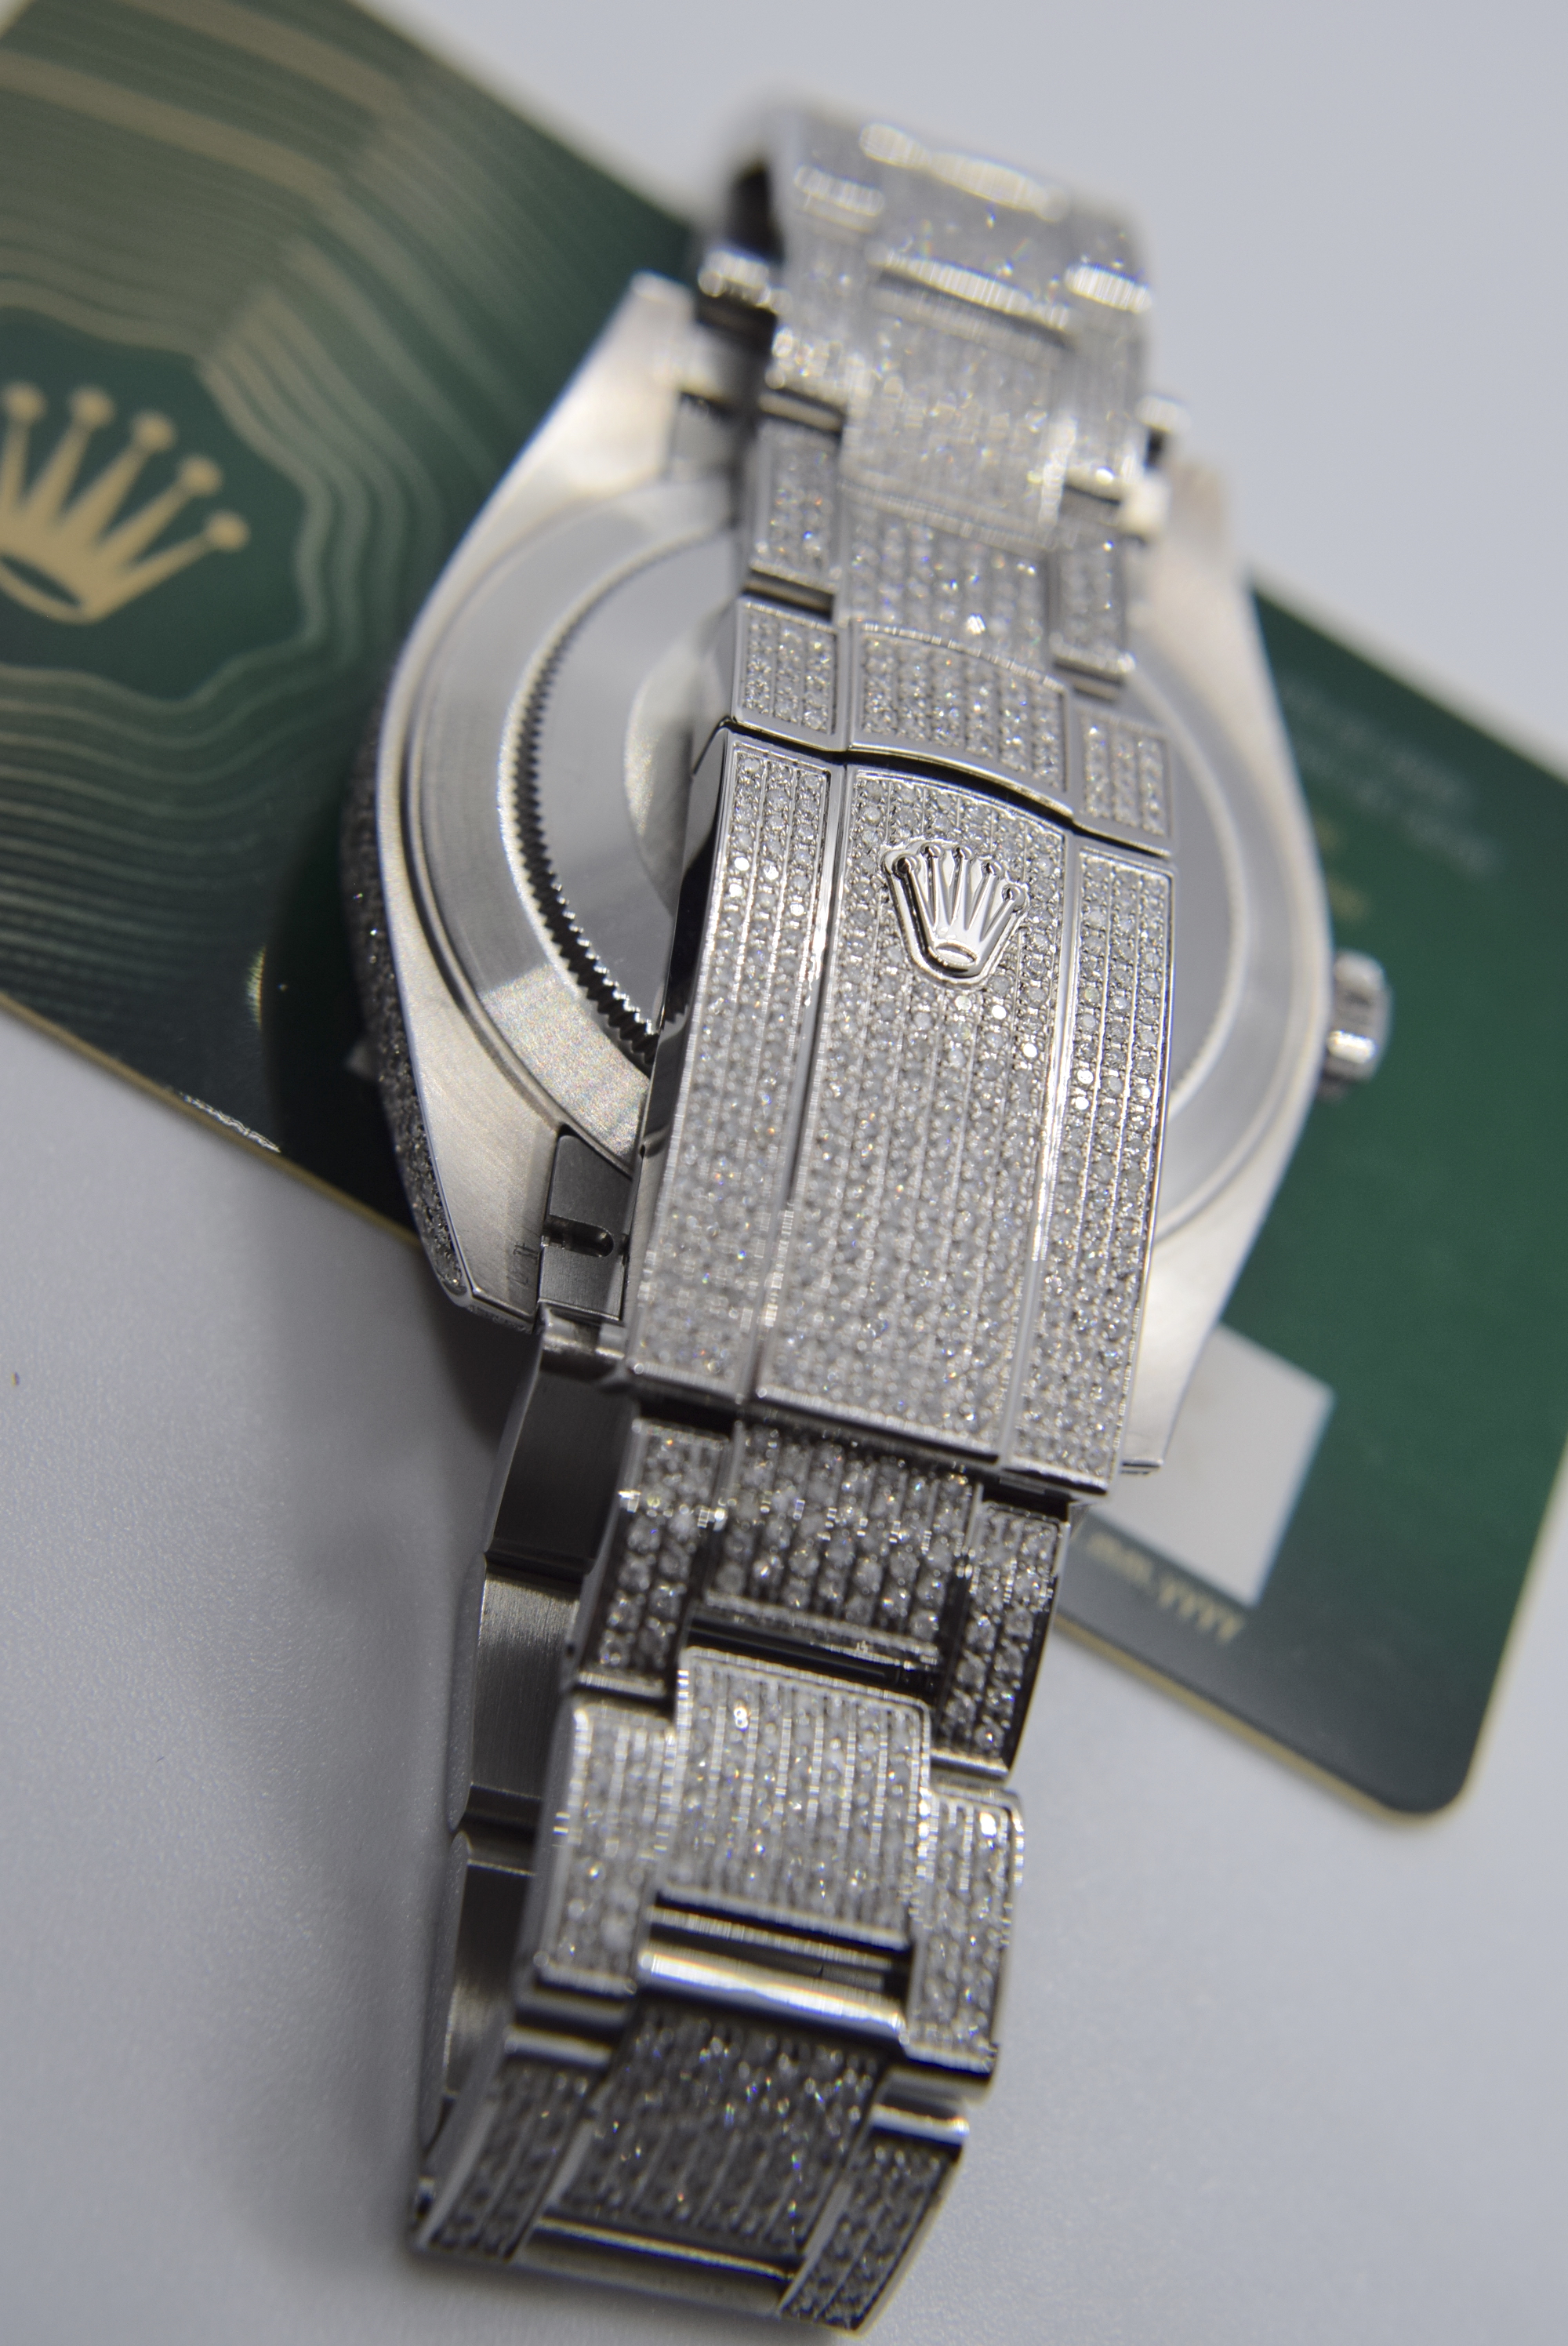 2022 ROLEX DATEJUST 41 REF. 126300 (FULLY DIAMOND-SET) WITH CERTIFICATE CARD - STAINLESS STEEL 41MM - Image 2 of 8